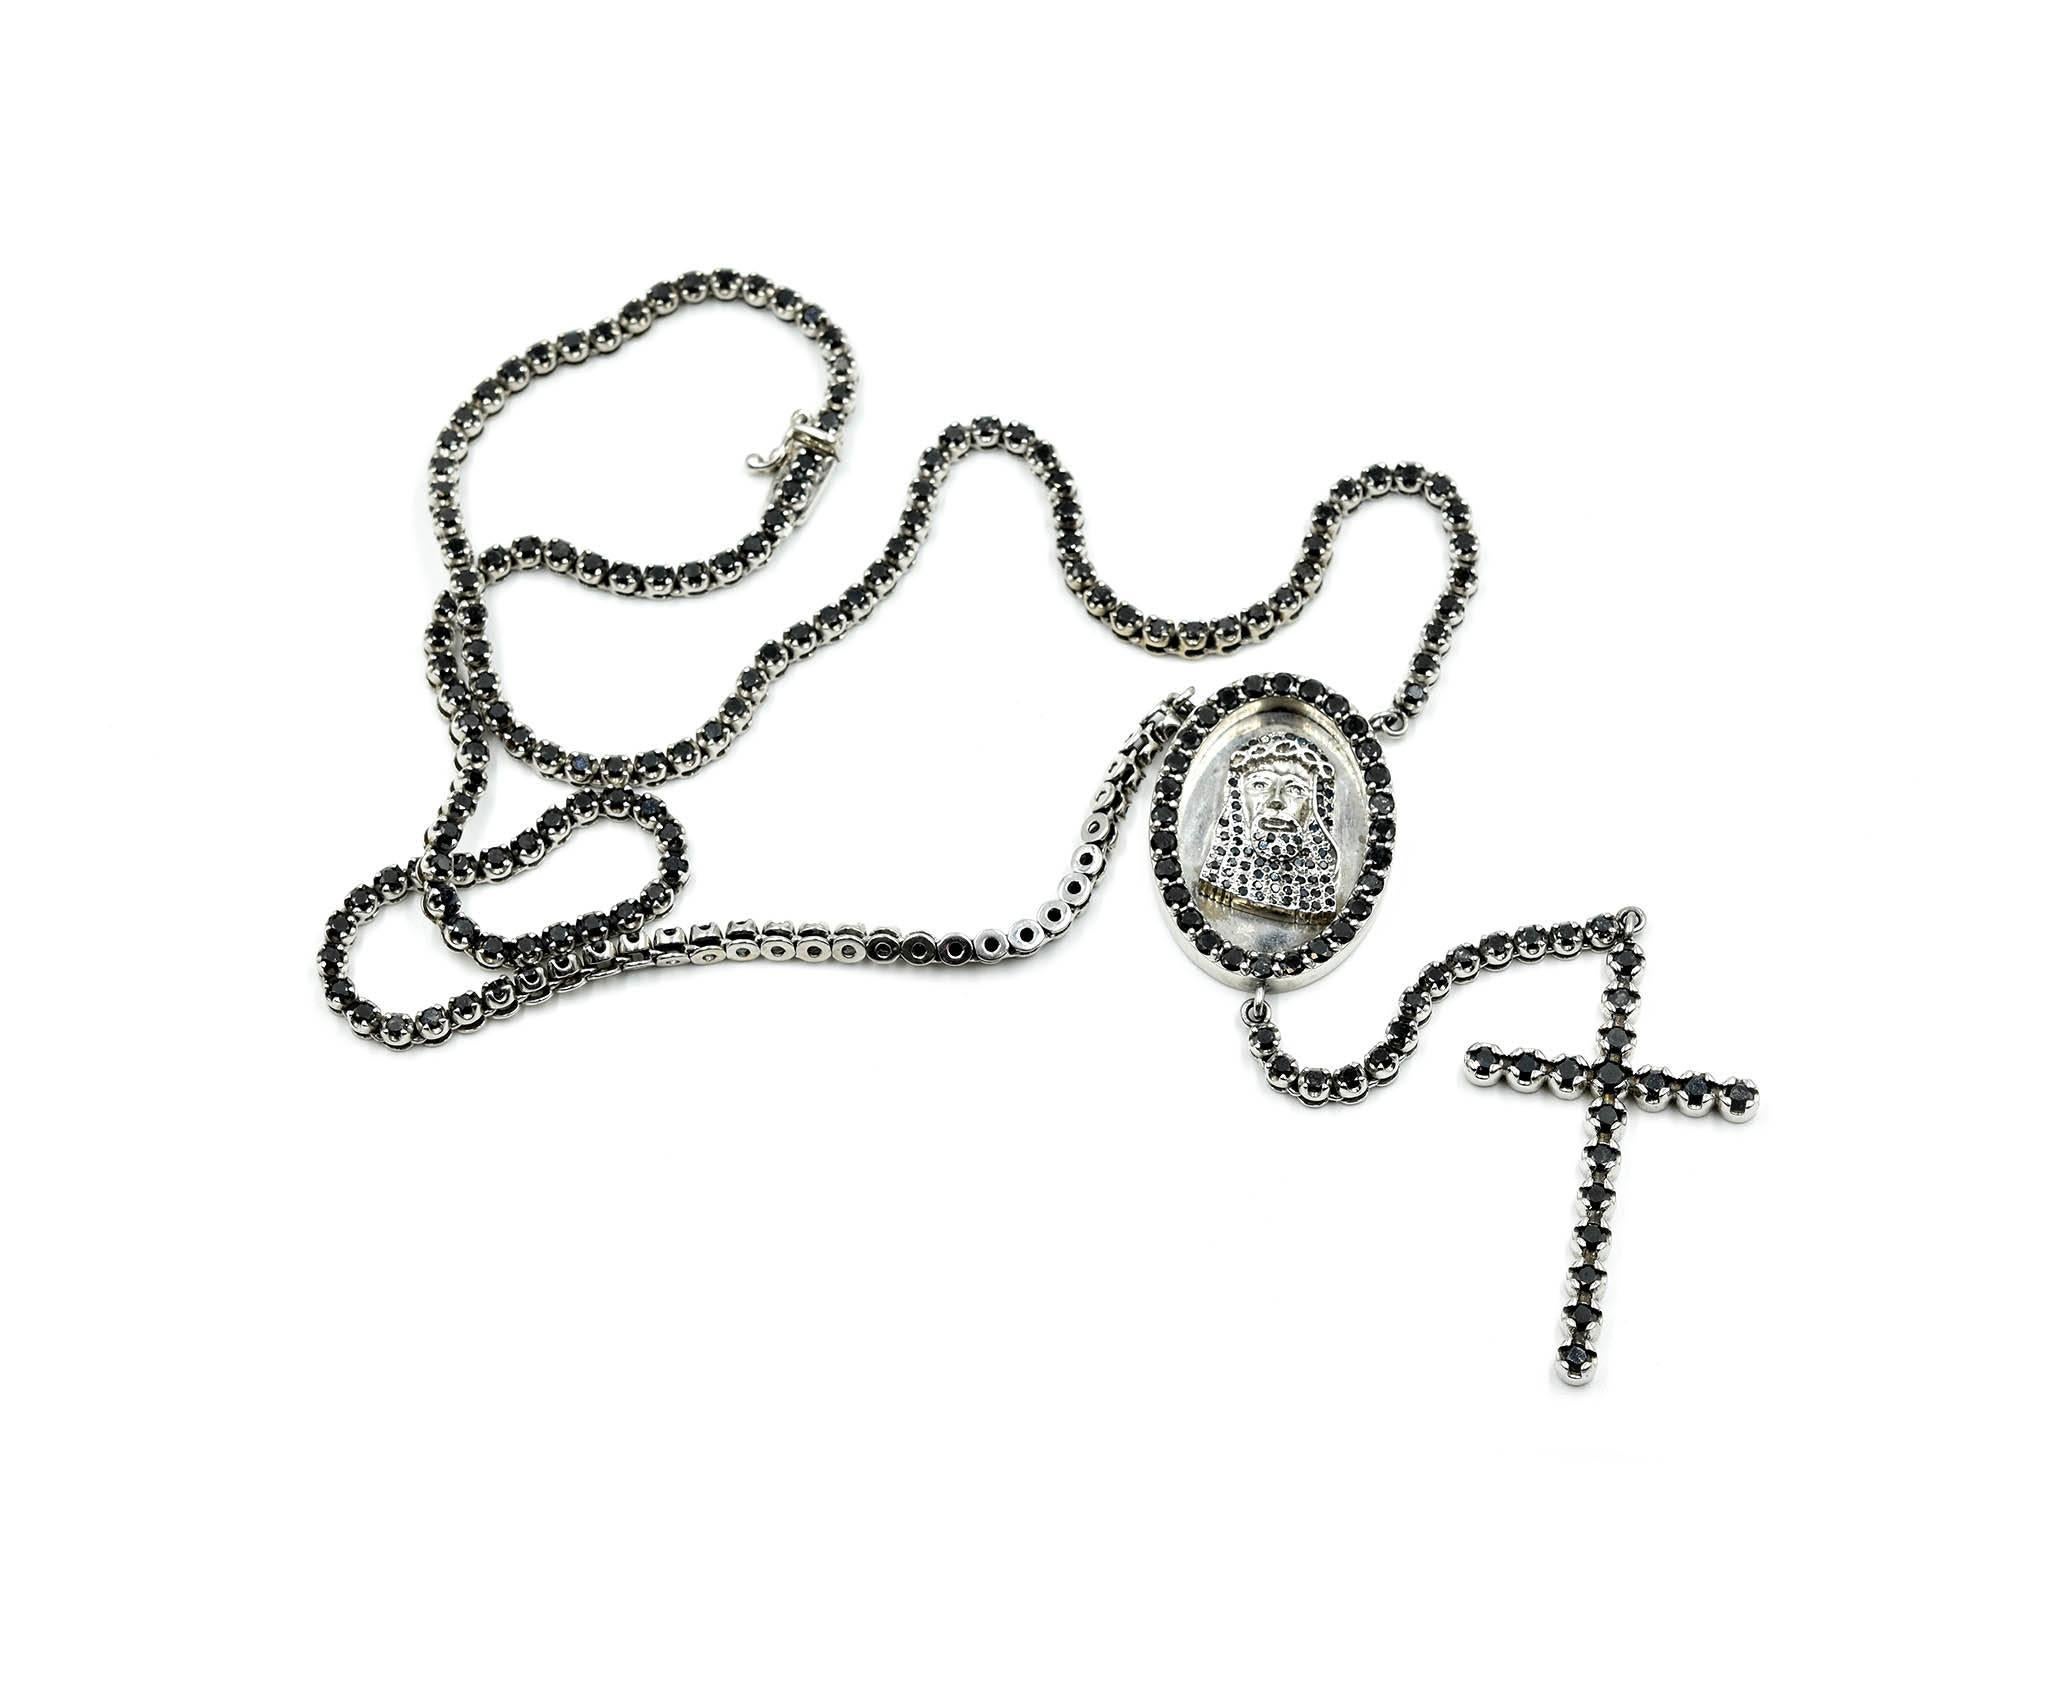 Designer: Johnny Dang
Material: 10k white gold
Diamonds: round brilliant black diamonds
Dimensions: necklace is 24 inches long, cross dangles 3 ¾ inches, Jesus pendant measures 1 ½ inch long by 1 inch wide 
Weight: 68.54 grams
Retail: $8,500
Box